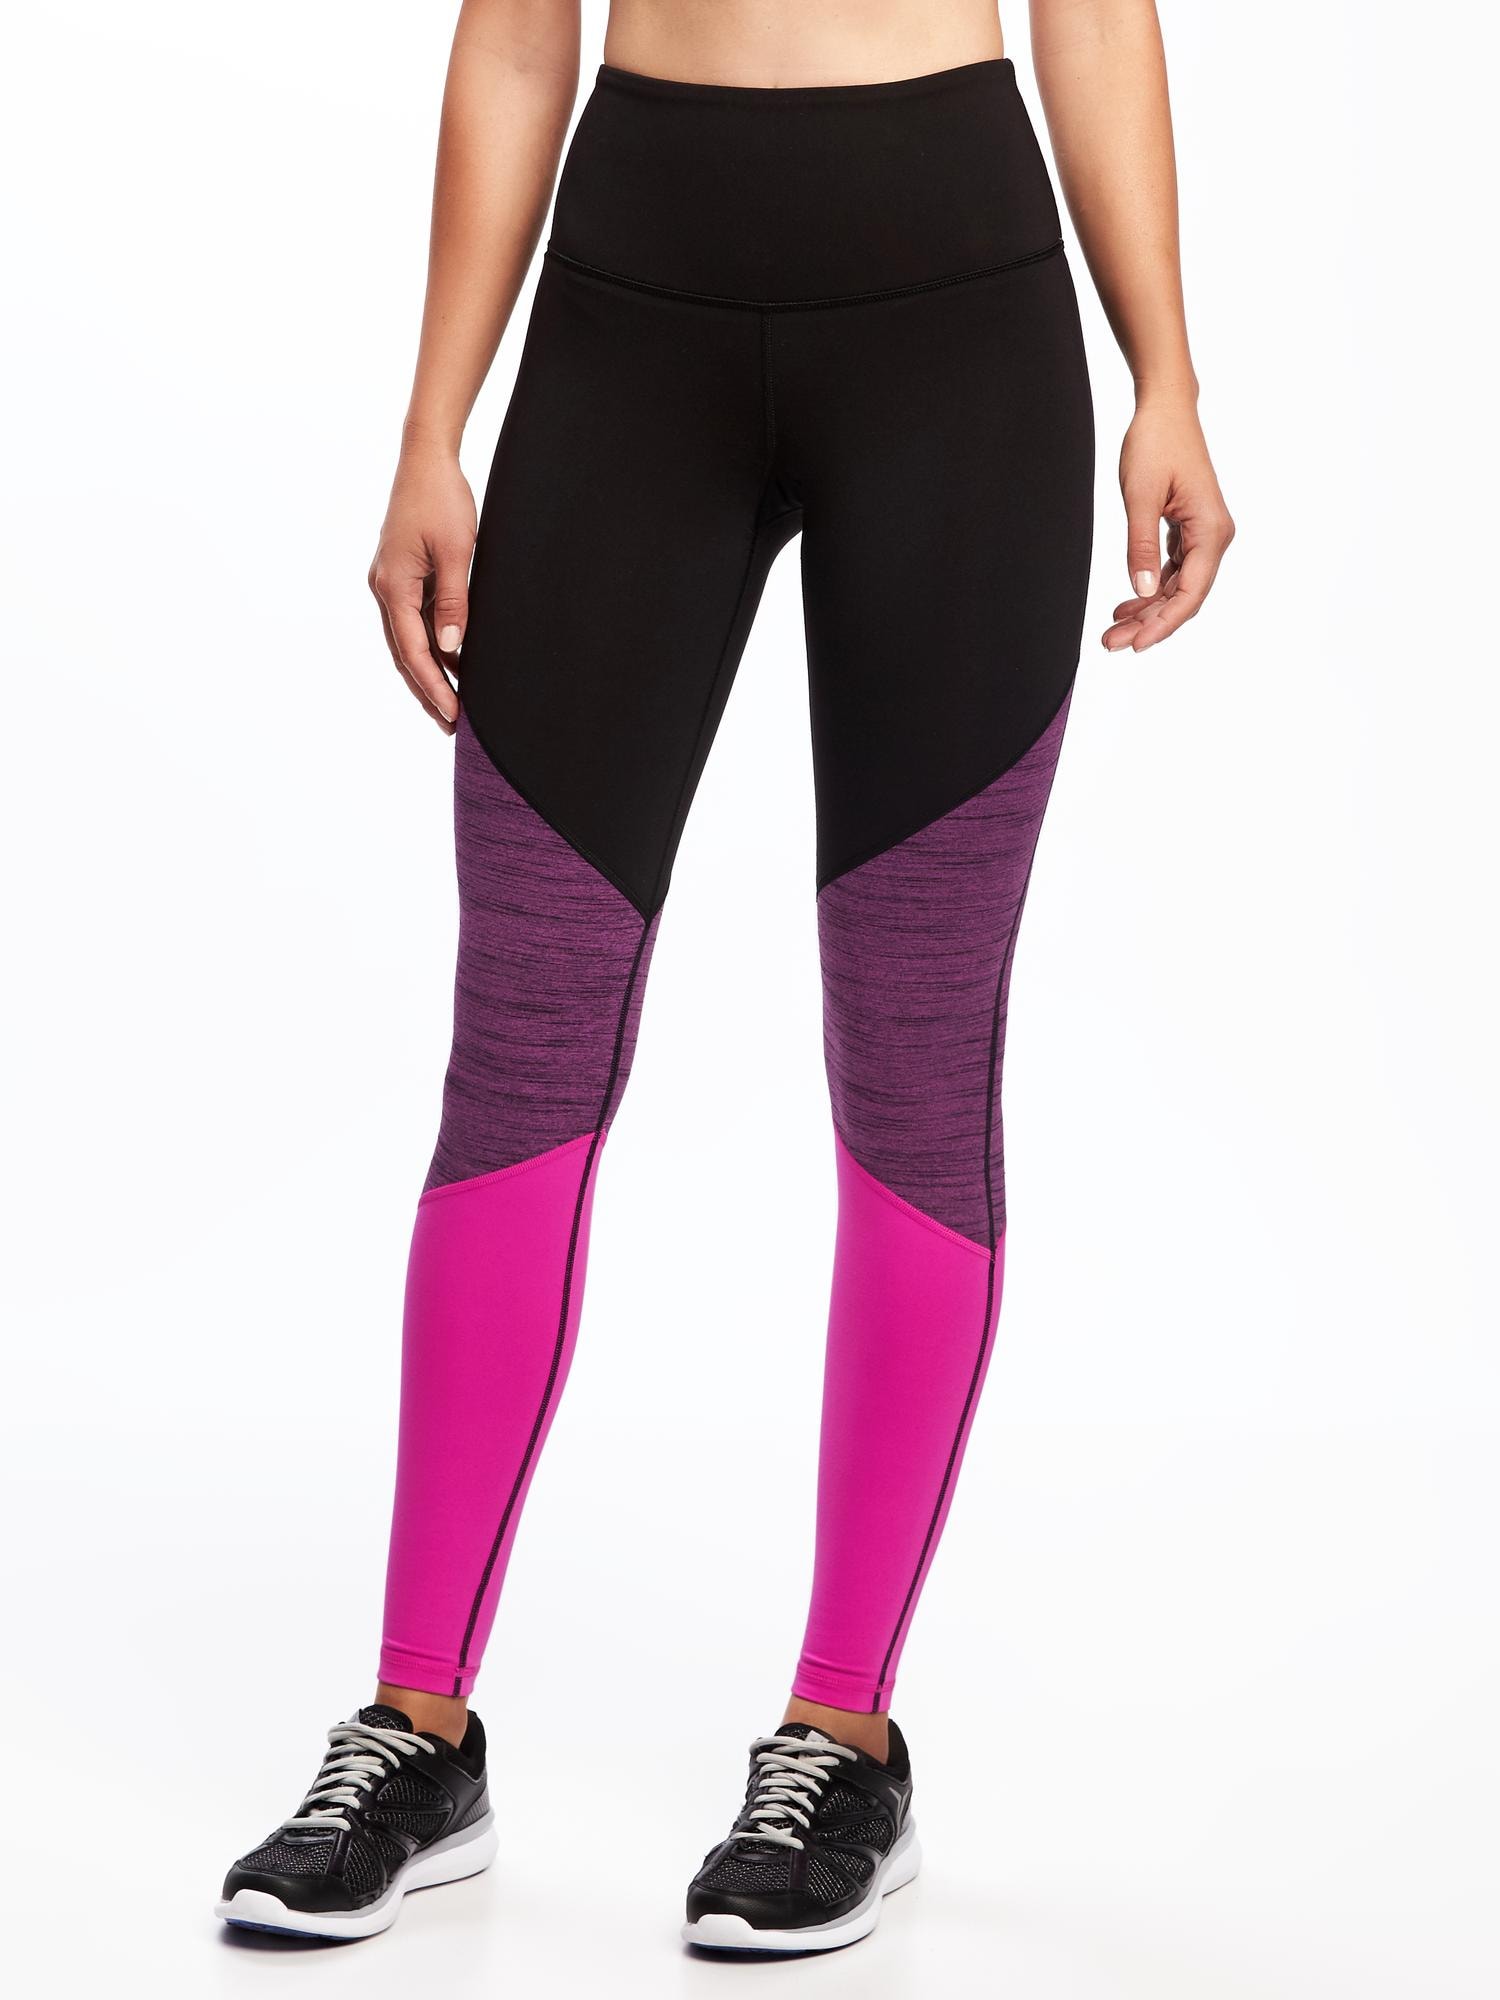 Go-Dry High-Rise Color-Block Compression Tights for Women